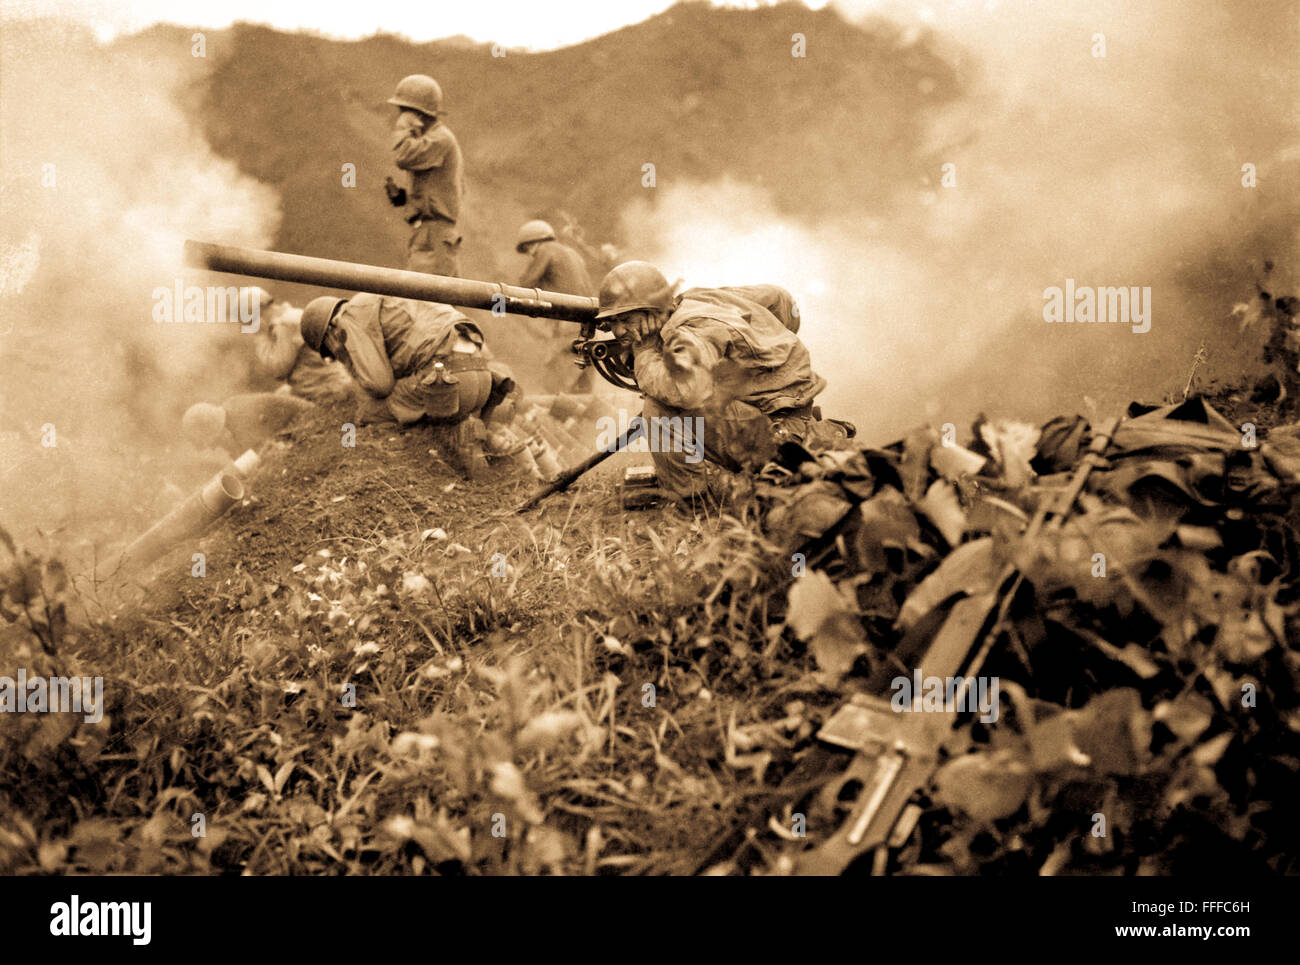 Pfc. Roman Prauty, a gunner with 31st RCT (crouching foreground), with the assistance of his gun crew, fires a 75mm recoilless rifle, near Oetlook-tong, Korea, in support of infantry units directly across the valley.  June 9, 1951. Stock Photo